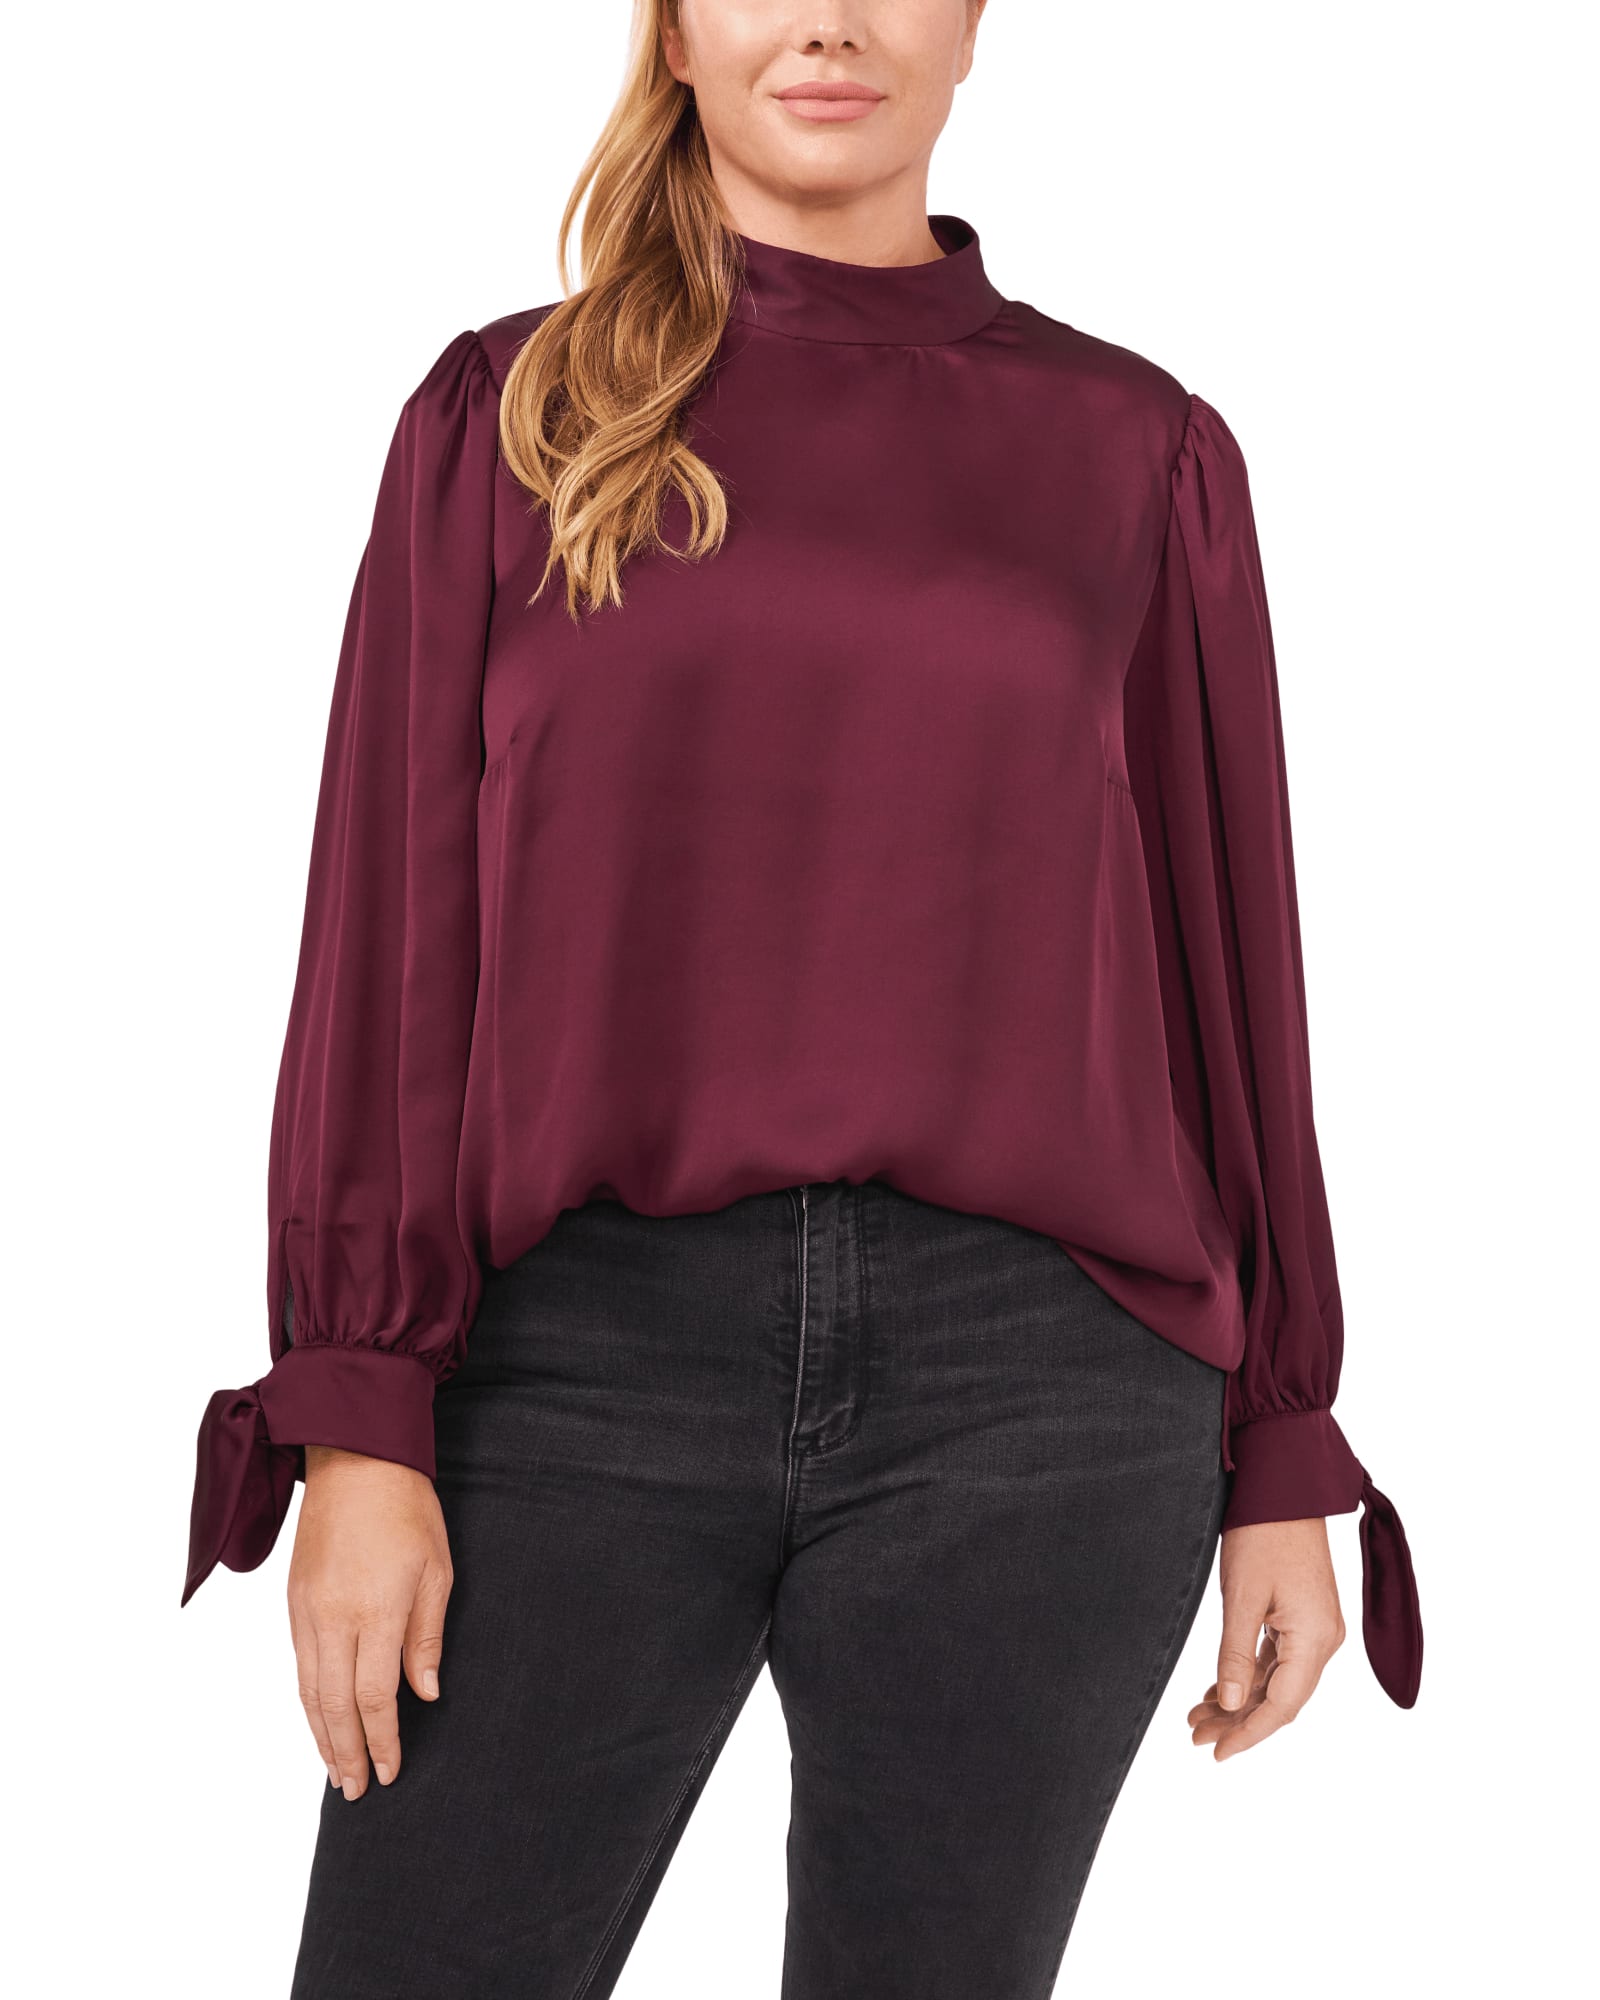 Kinsley Square Neck Long-Sleeve Top